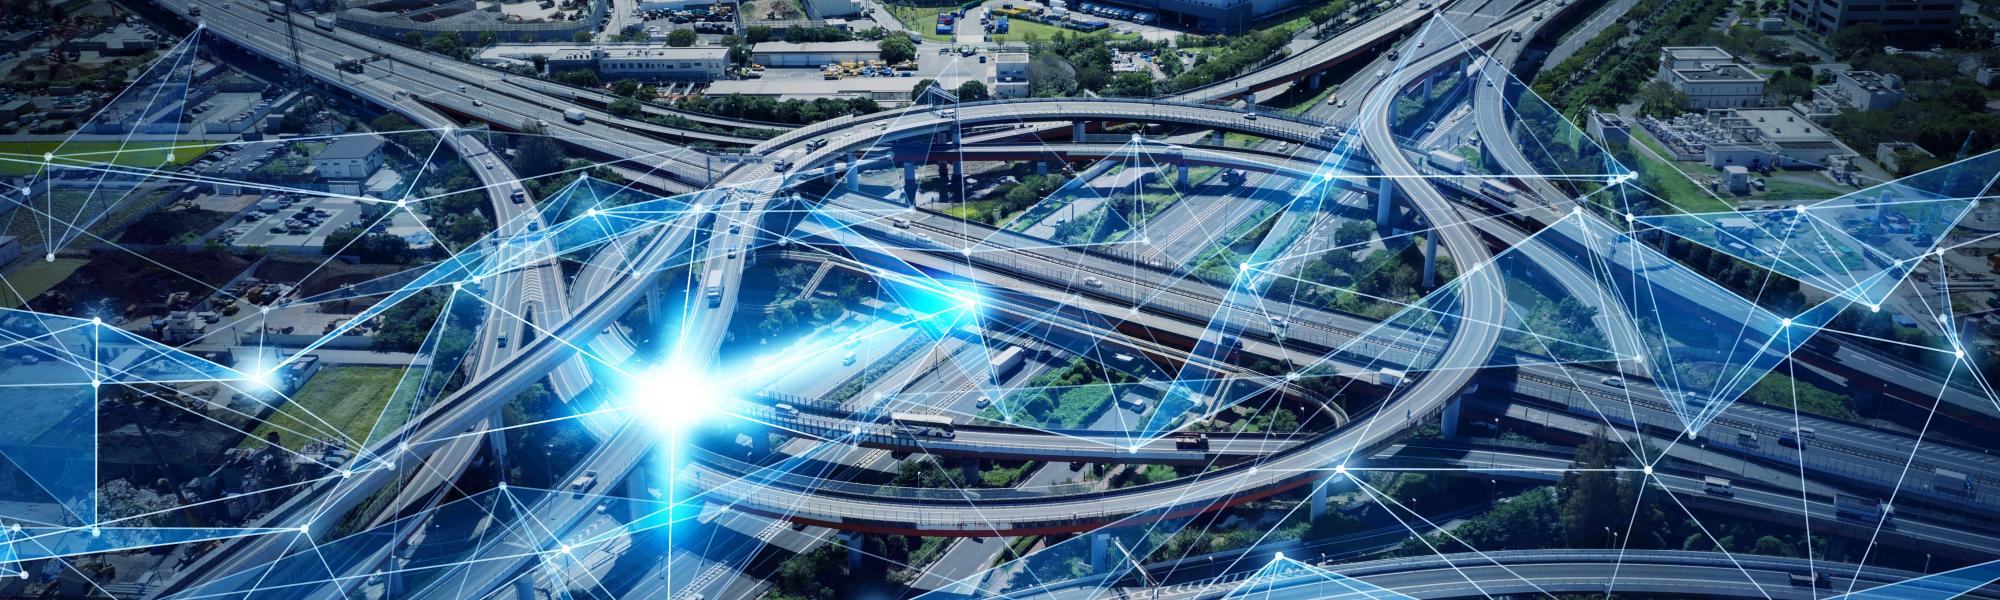 Demystifying Digital In The Future Of Mobility And Transport Iru